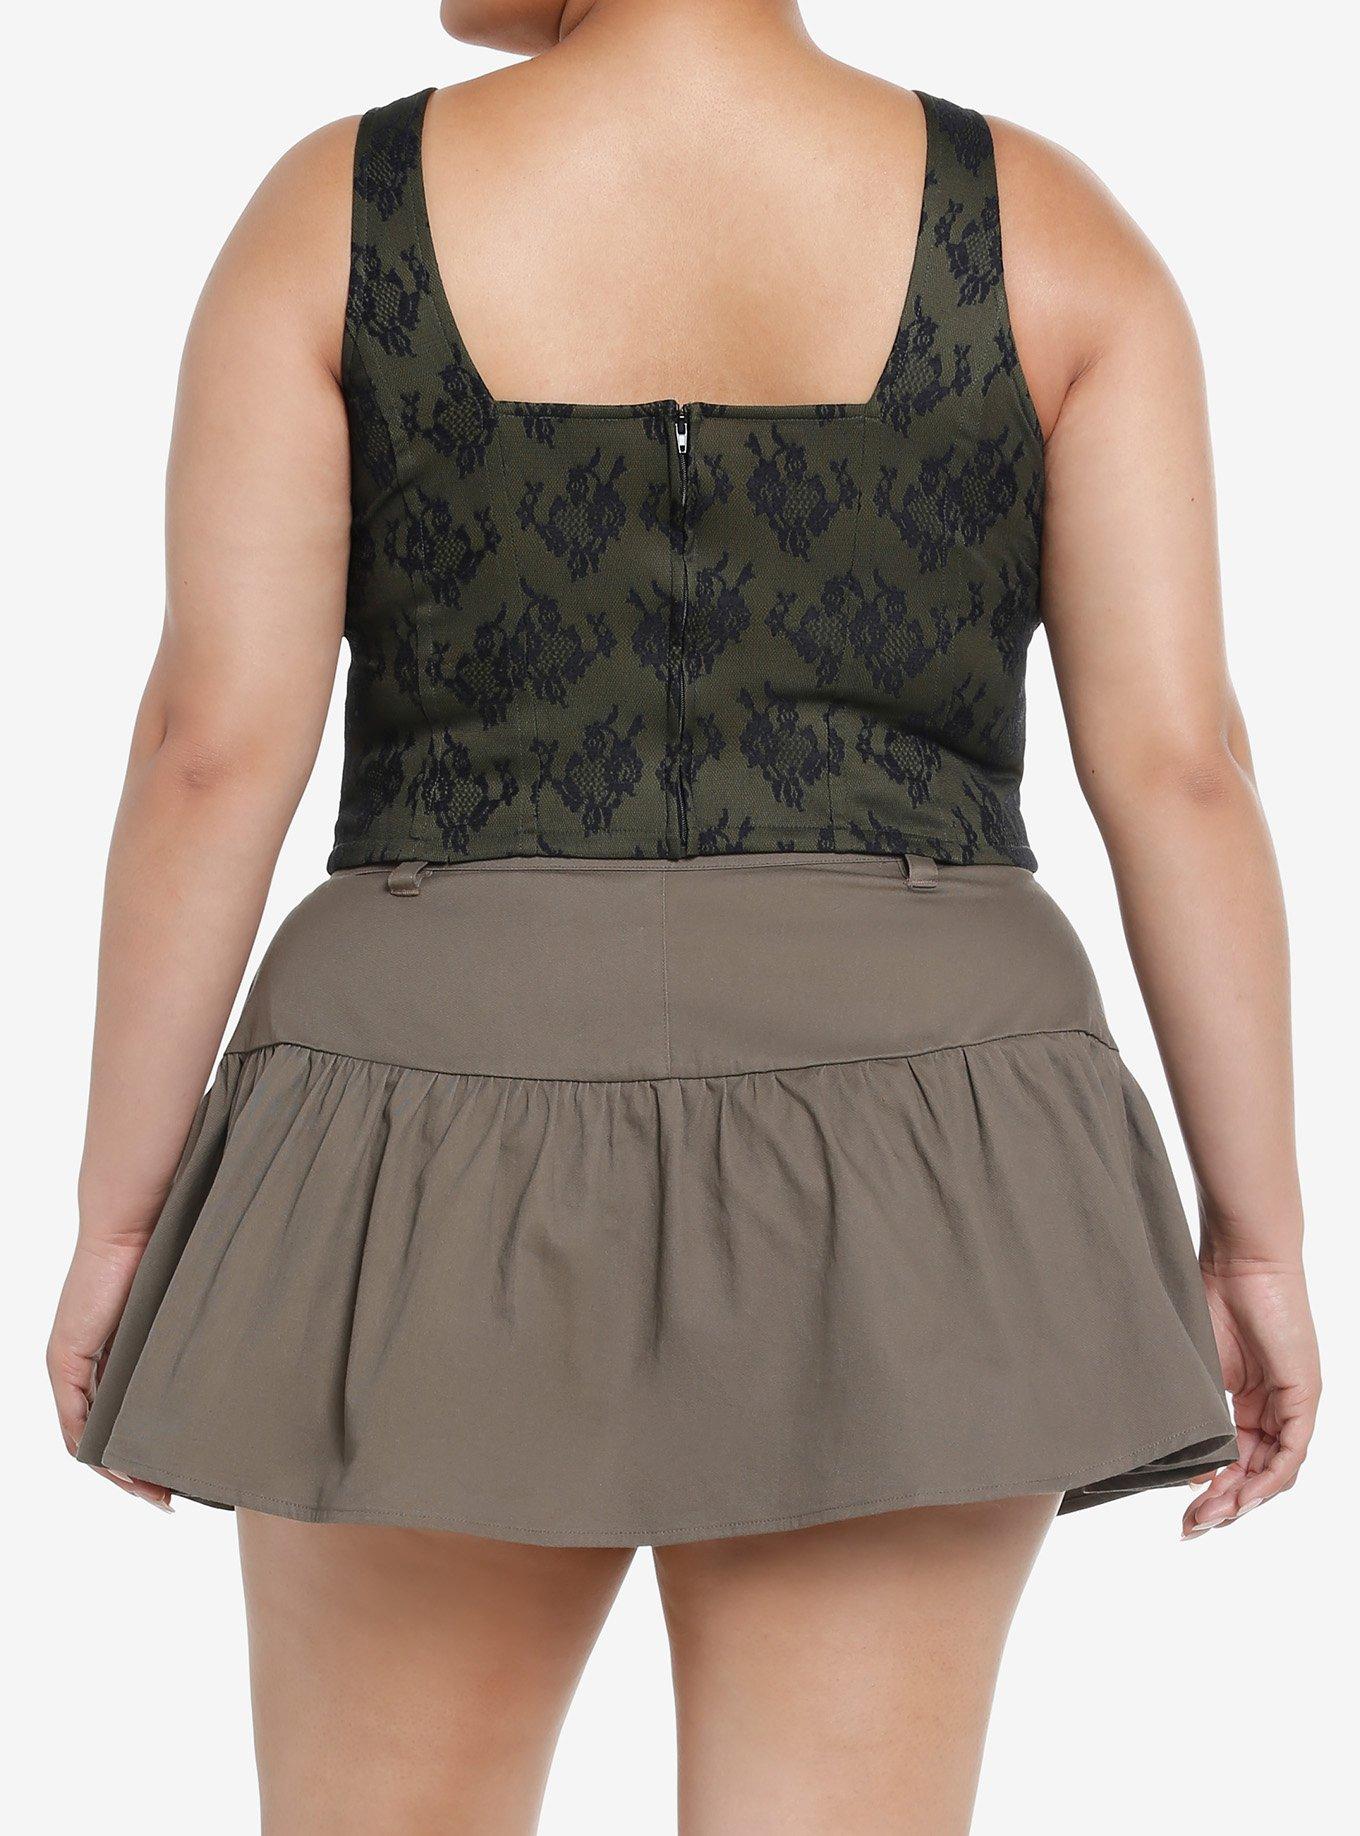 Thorn & Fable Green & Black Lace Girls Corset Top Plus Size, BLACK, alternate